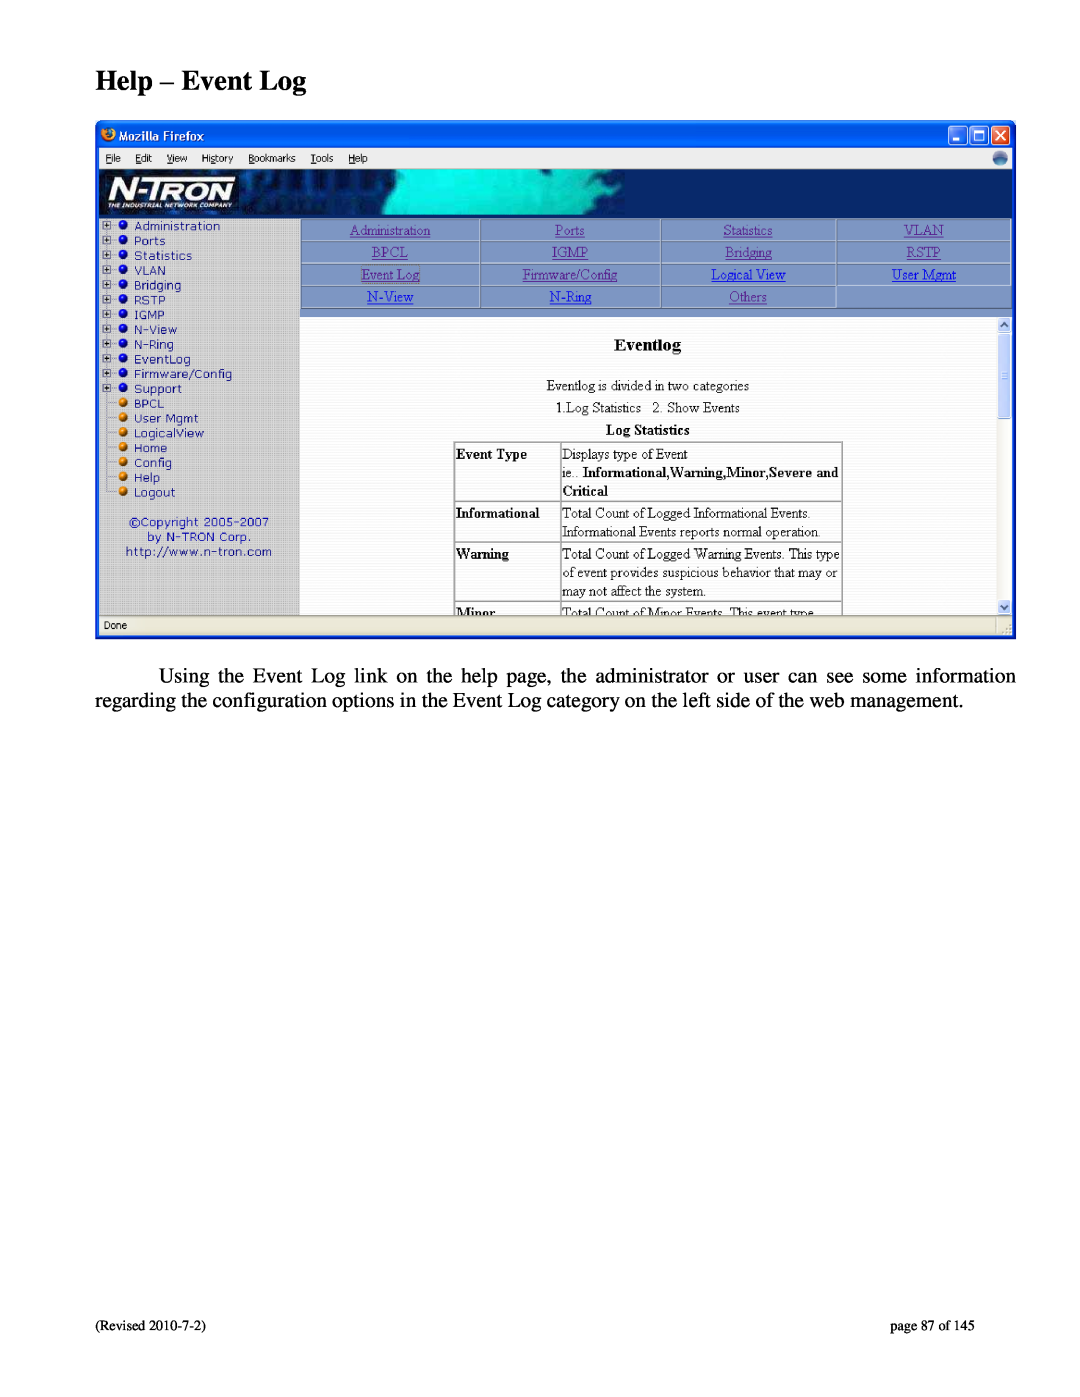 N-Tron 9000 user manual Help - Event Log, page 87 of 